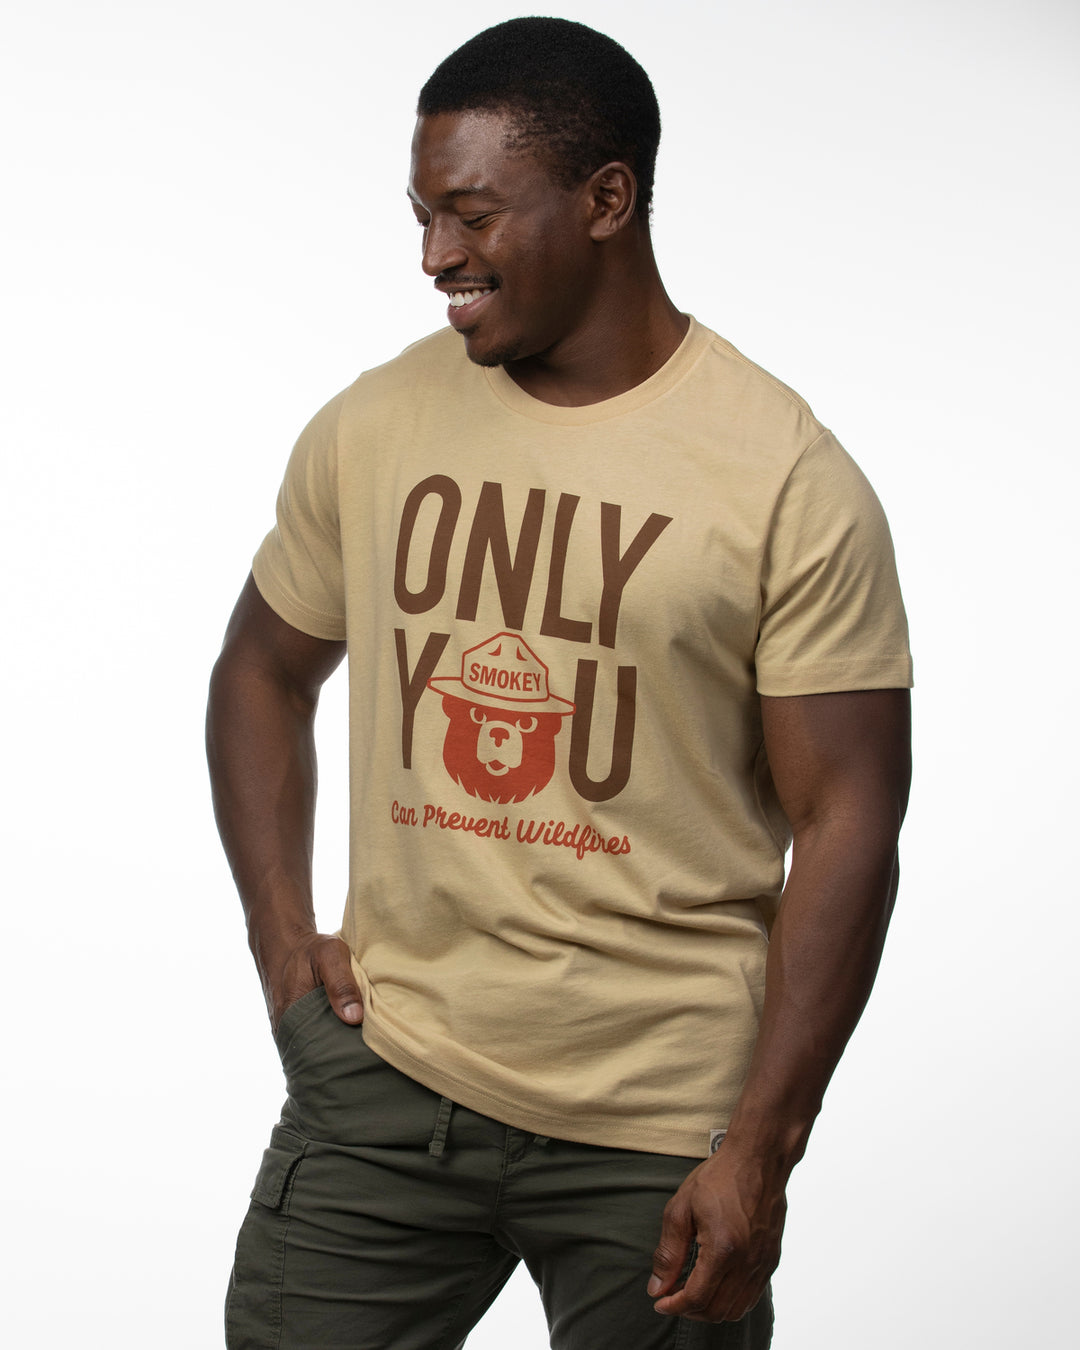 Only You Heritage Unisex Short Sleeve Tee Shirts & Tops  